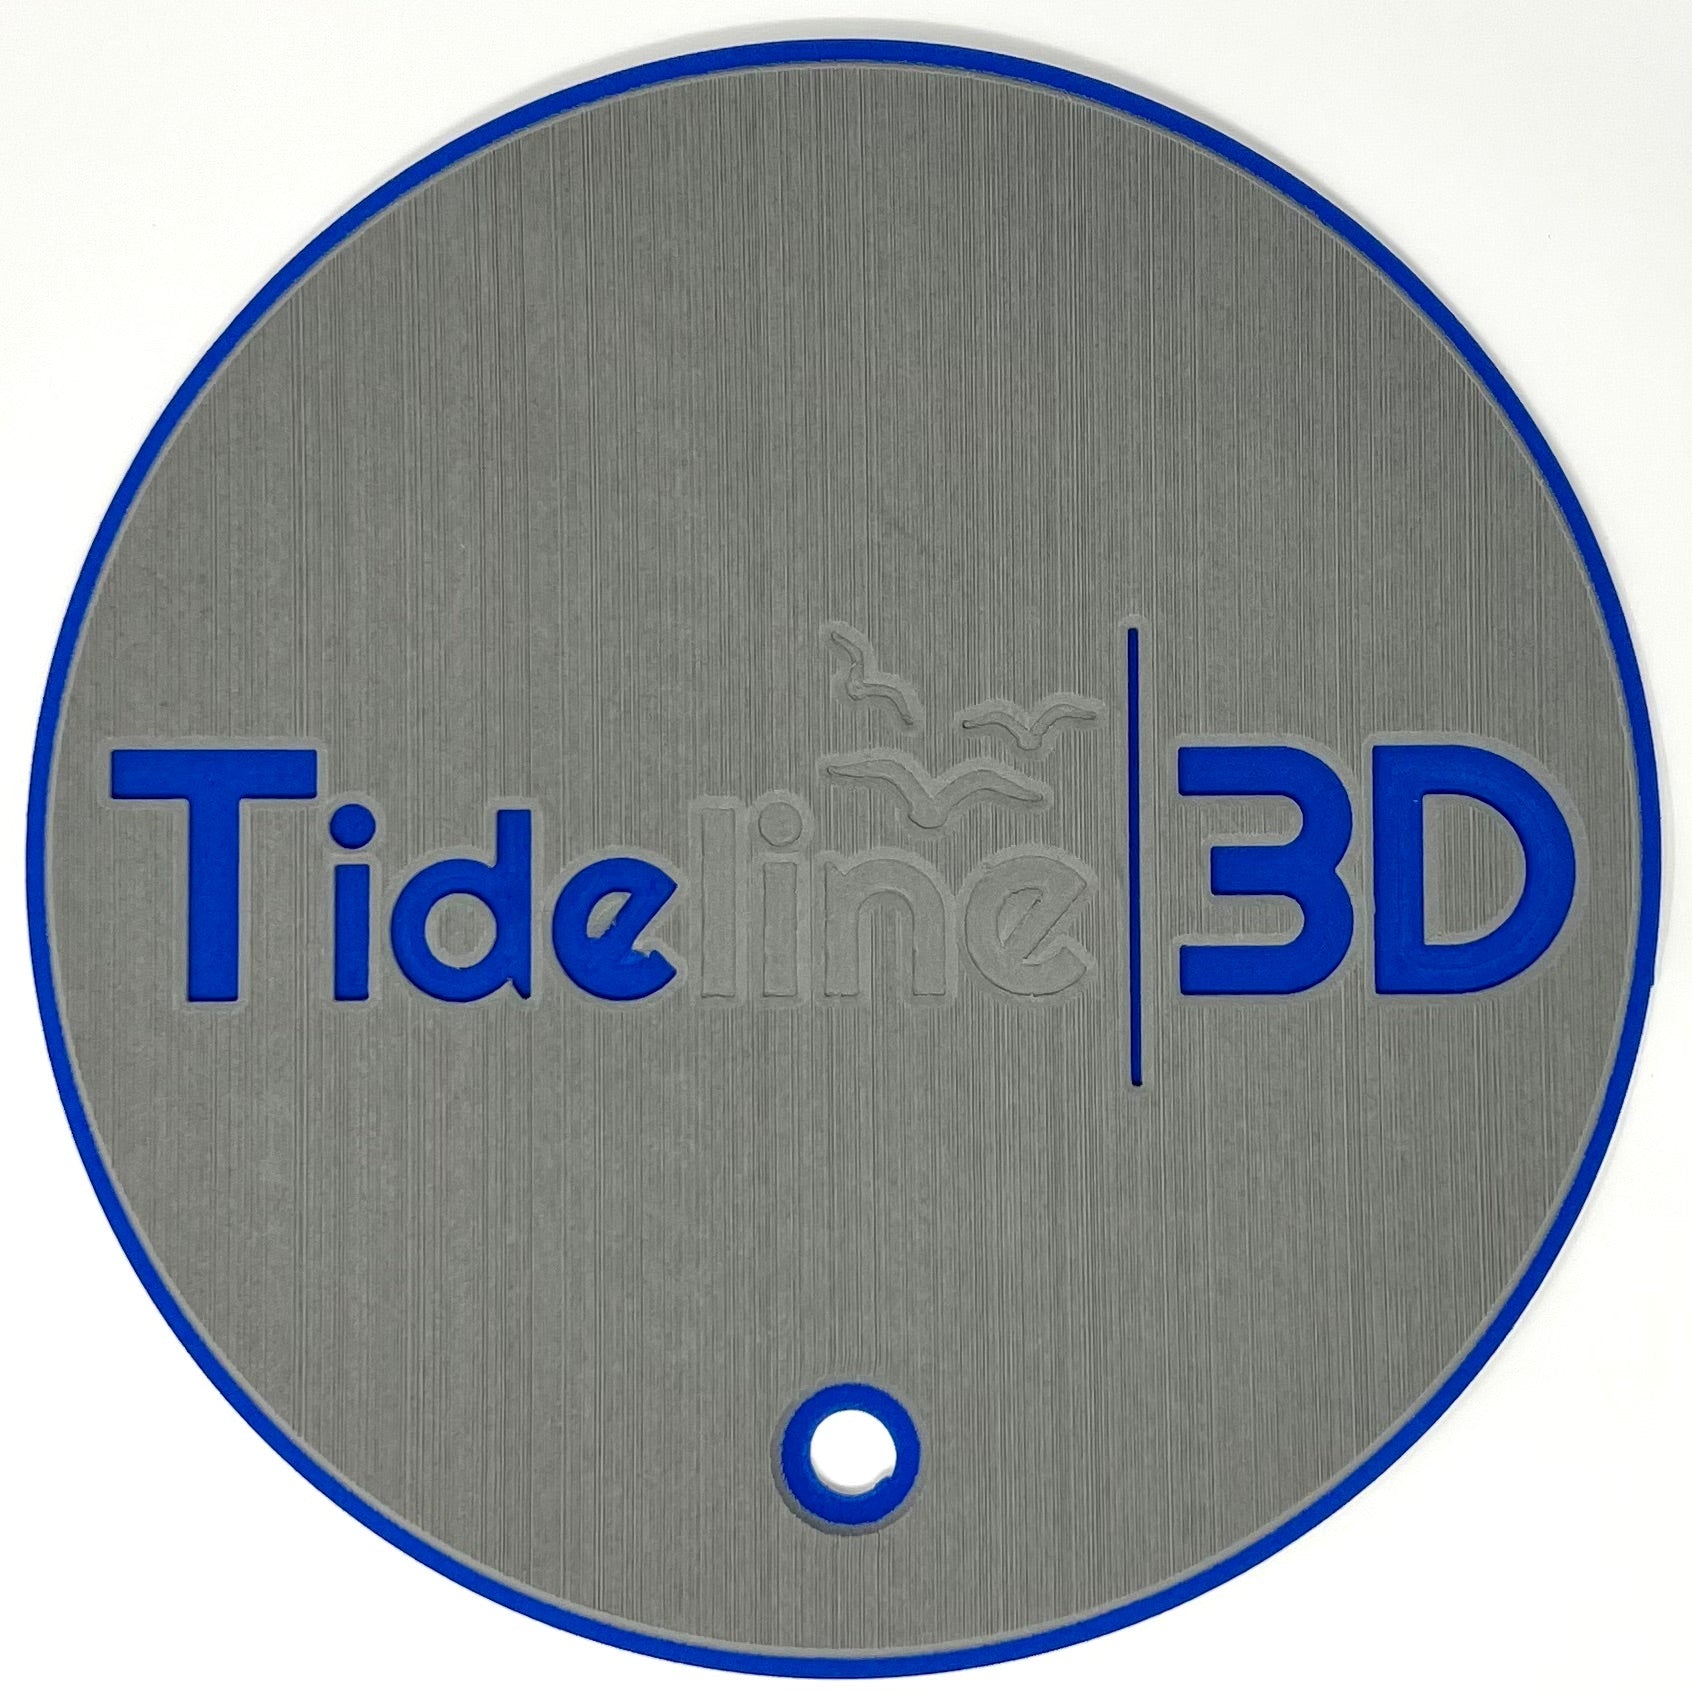 Products – Tideline3D